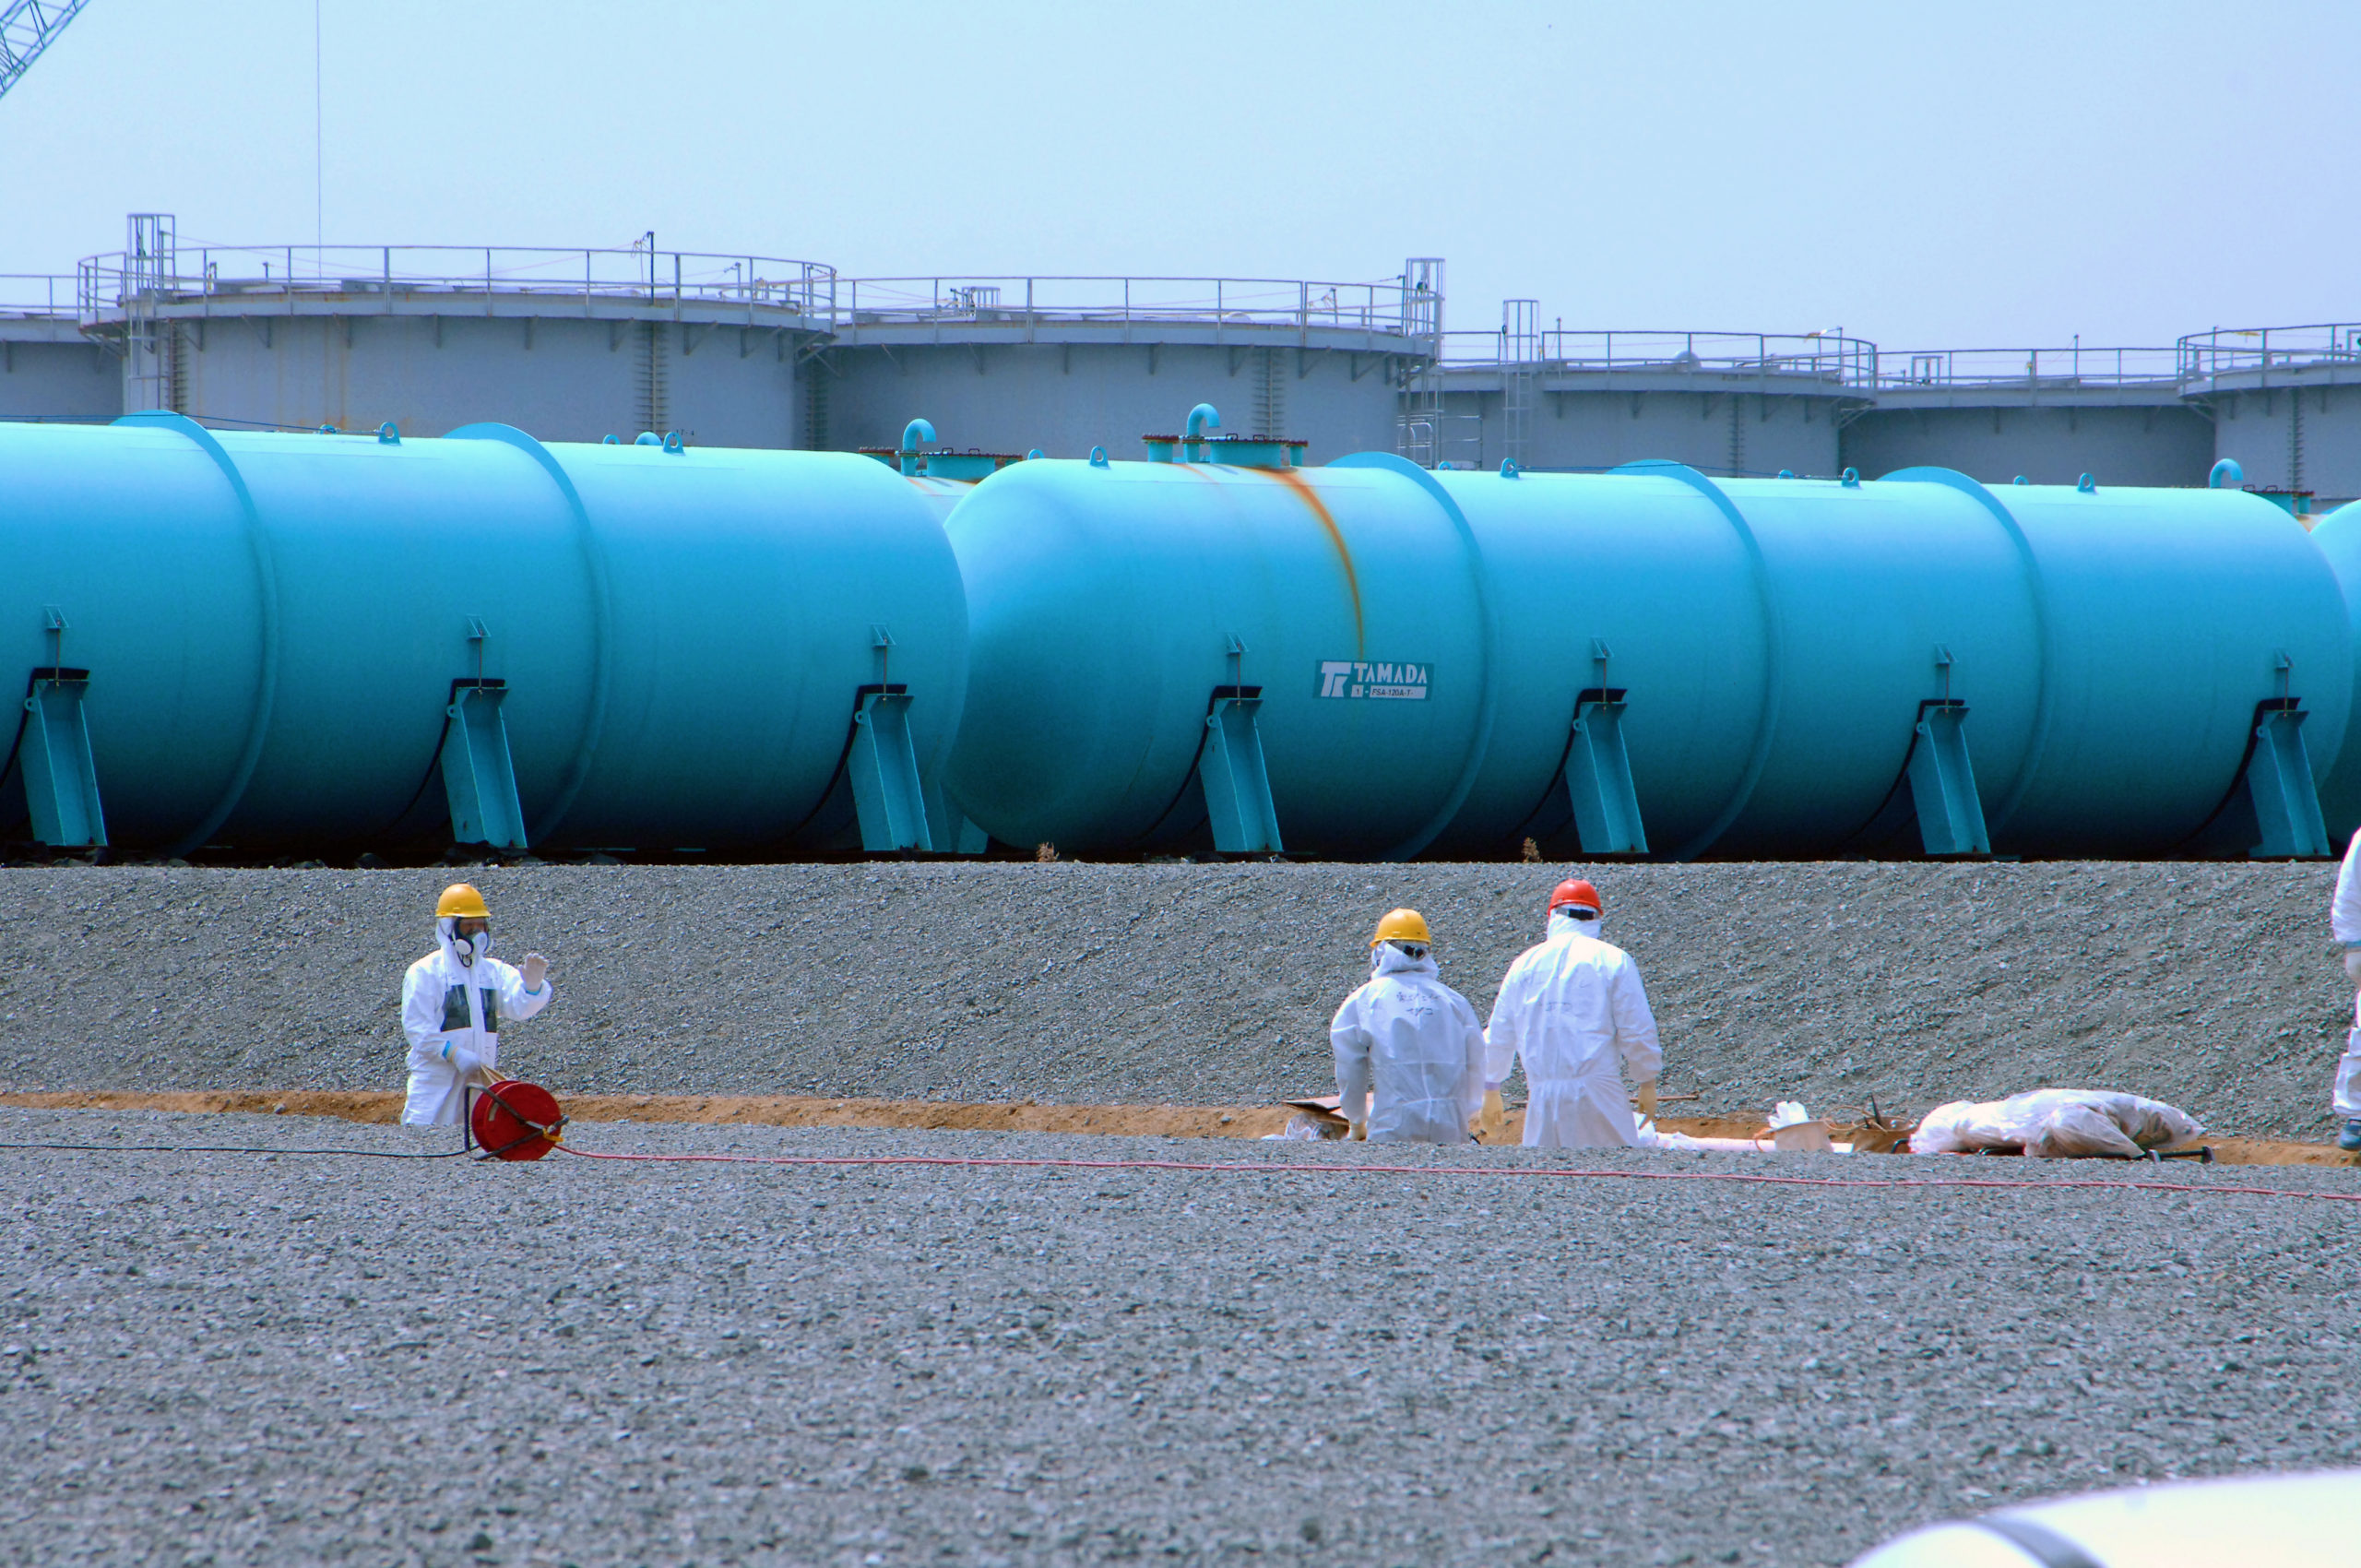 Japan's nuclear policy shift marks a turning point for uranium